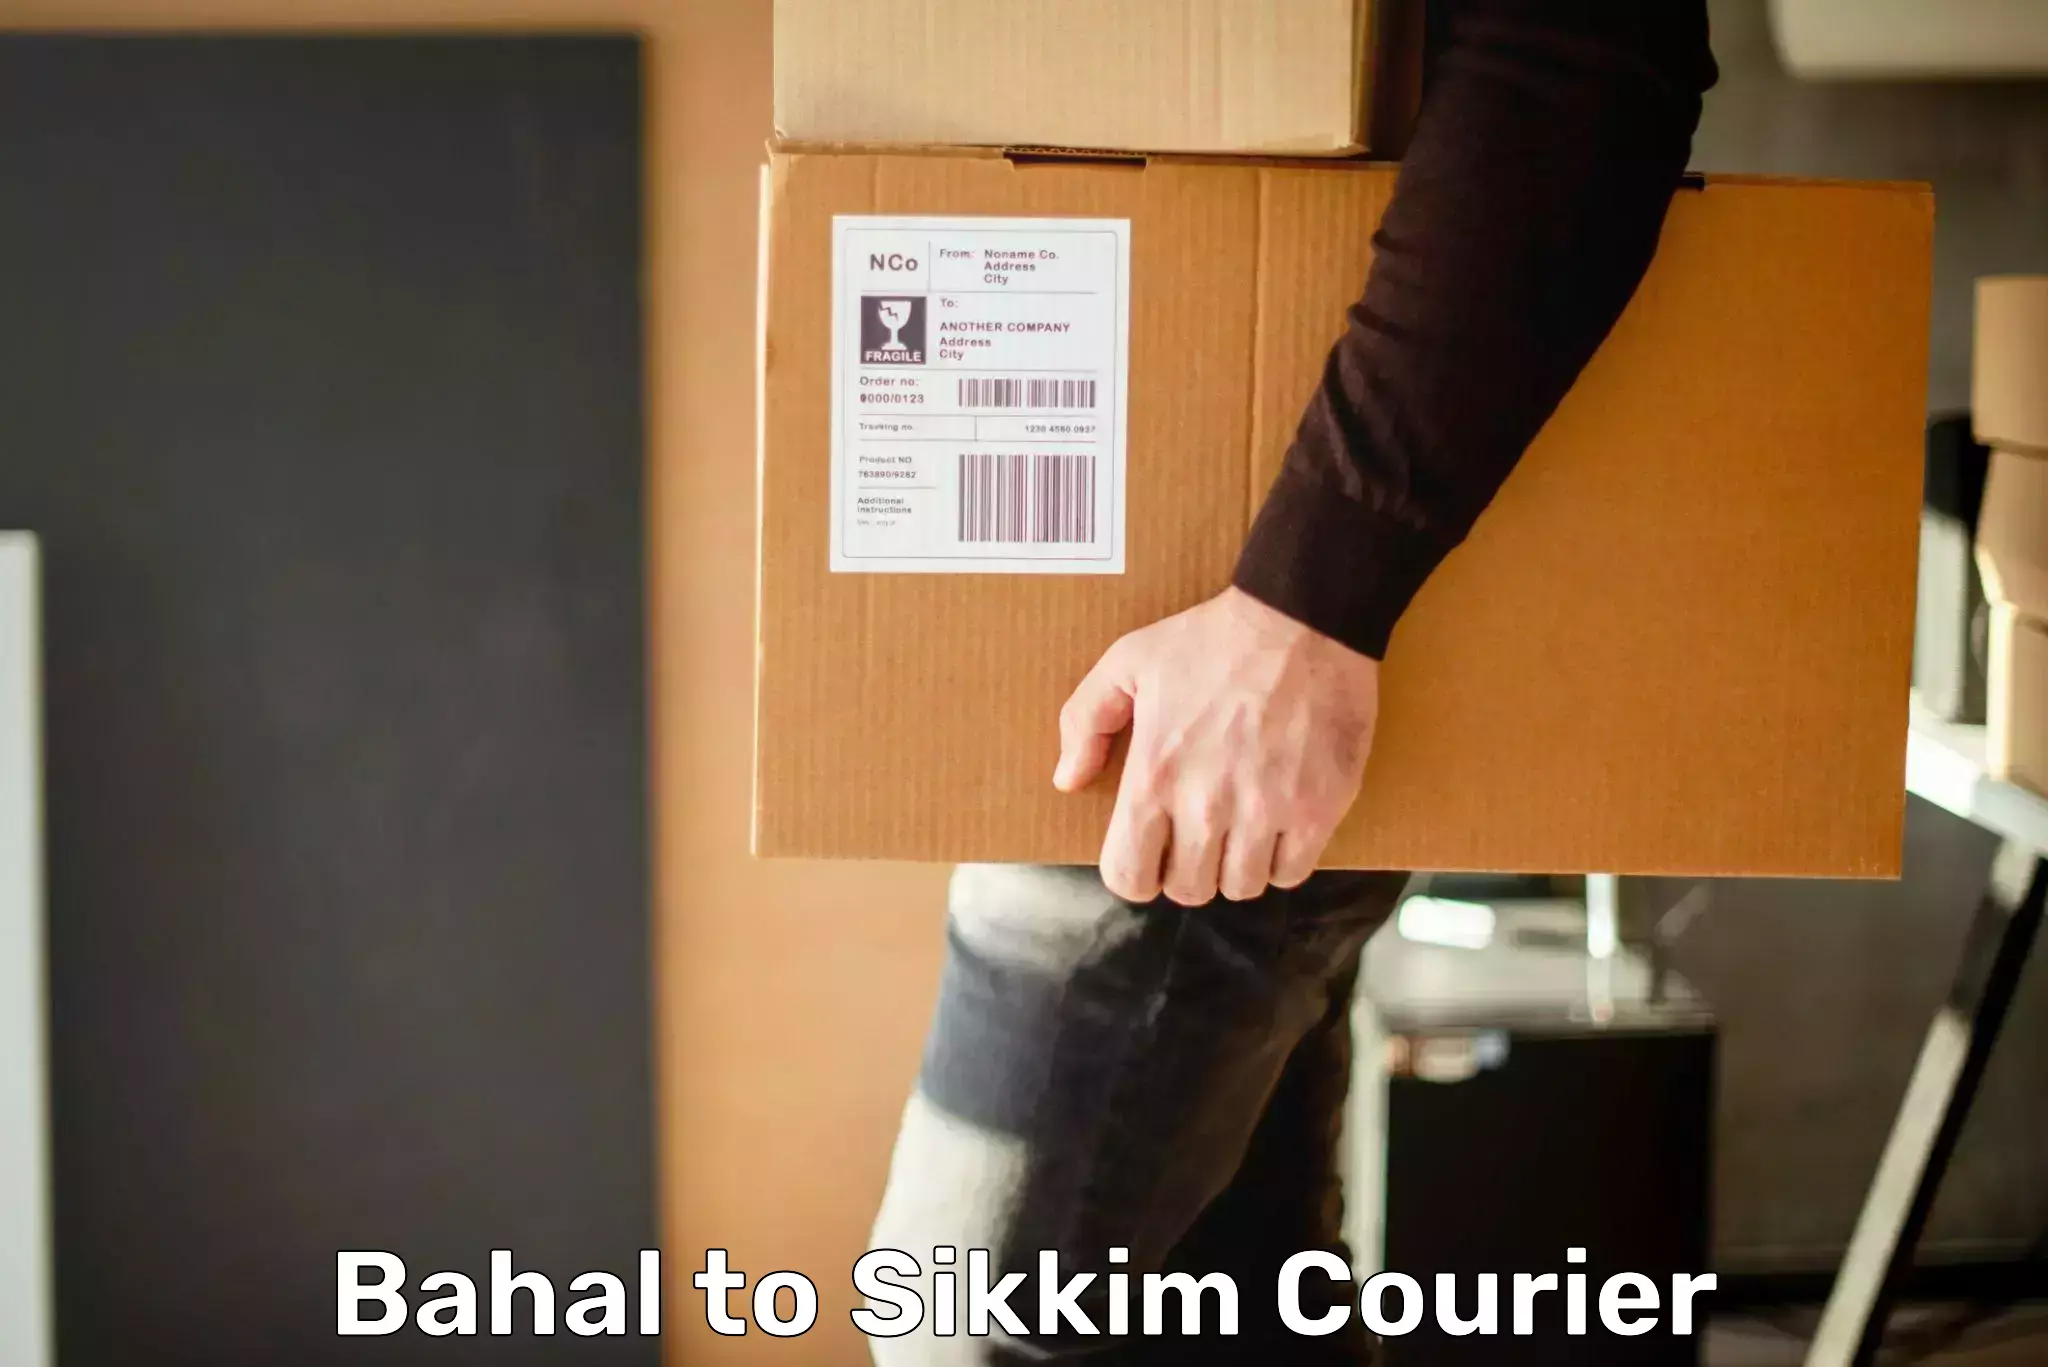 Global shipping networks Bahal to North Sikkim